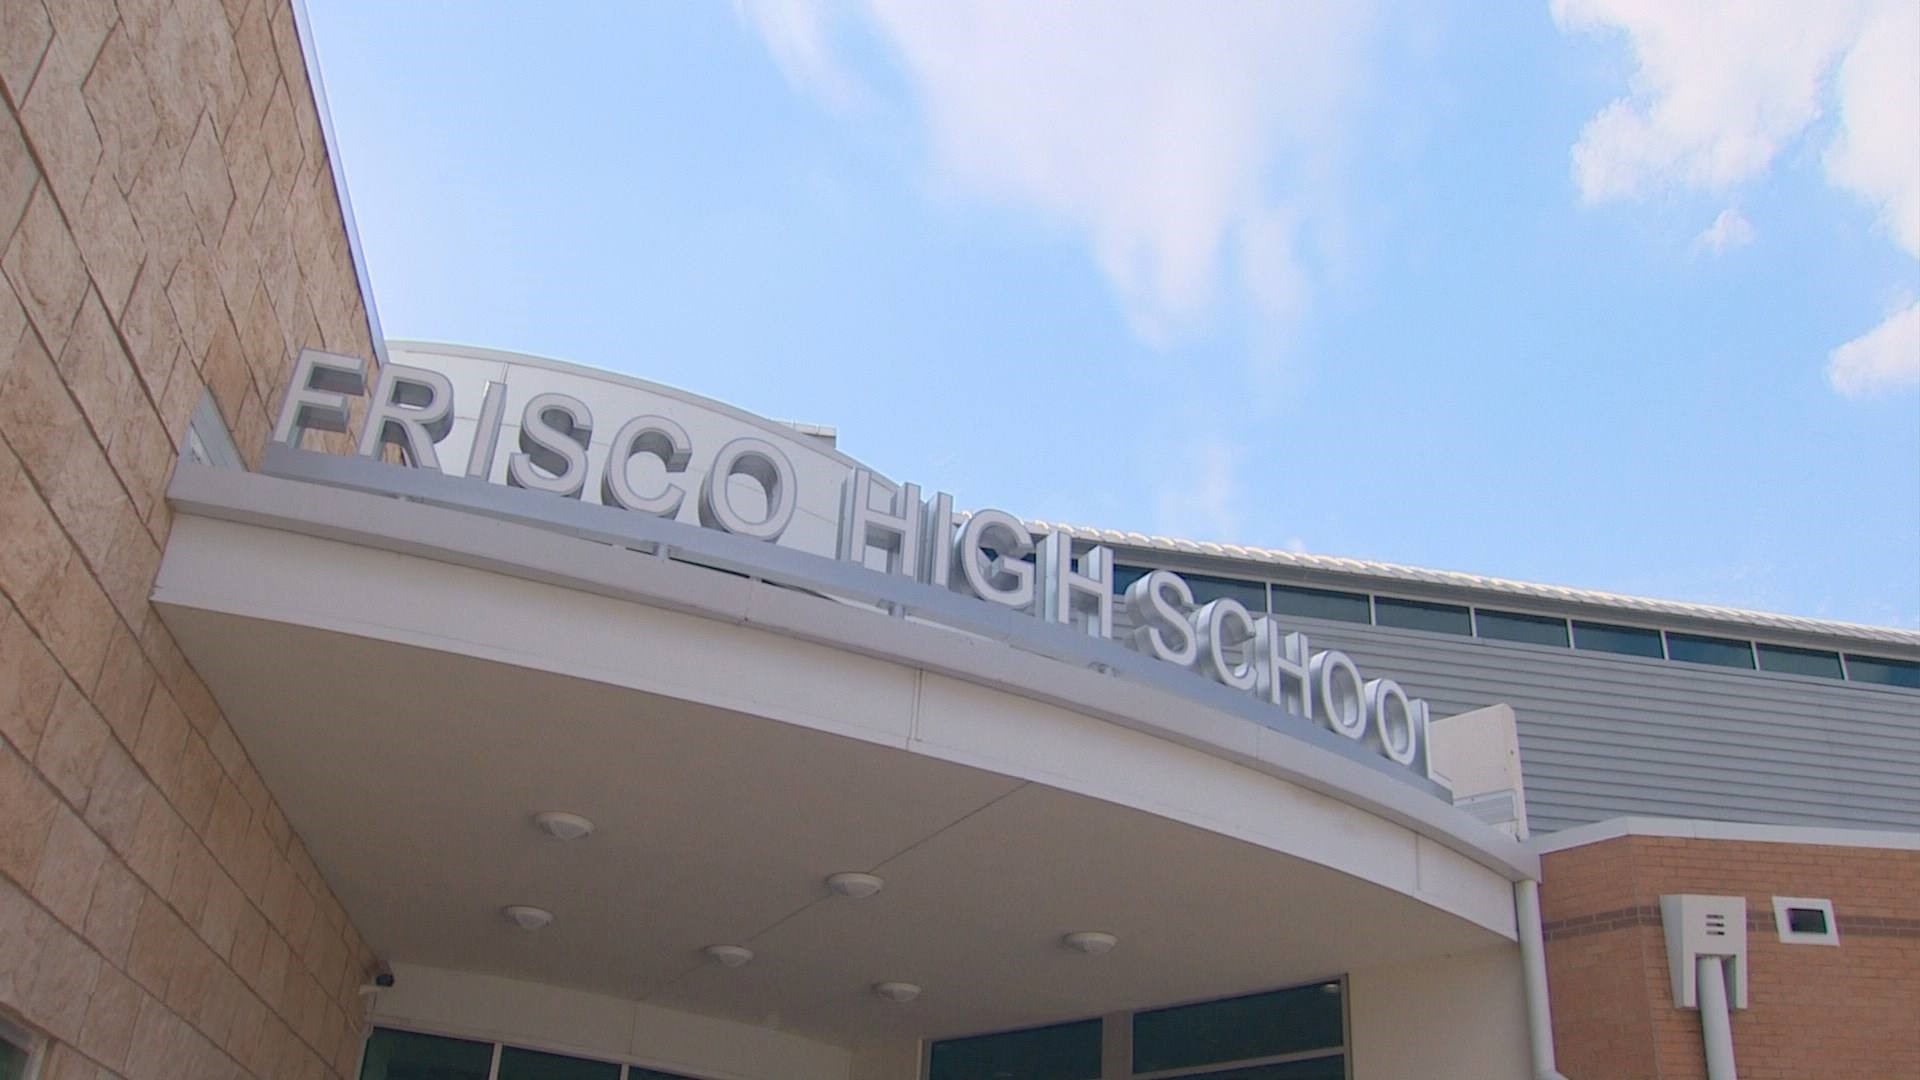 School officials and Frisco police "immediately began an investigation and that investigation is still underway."